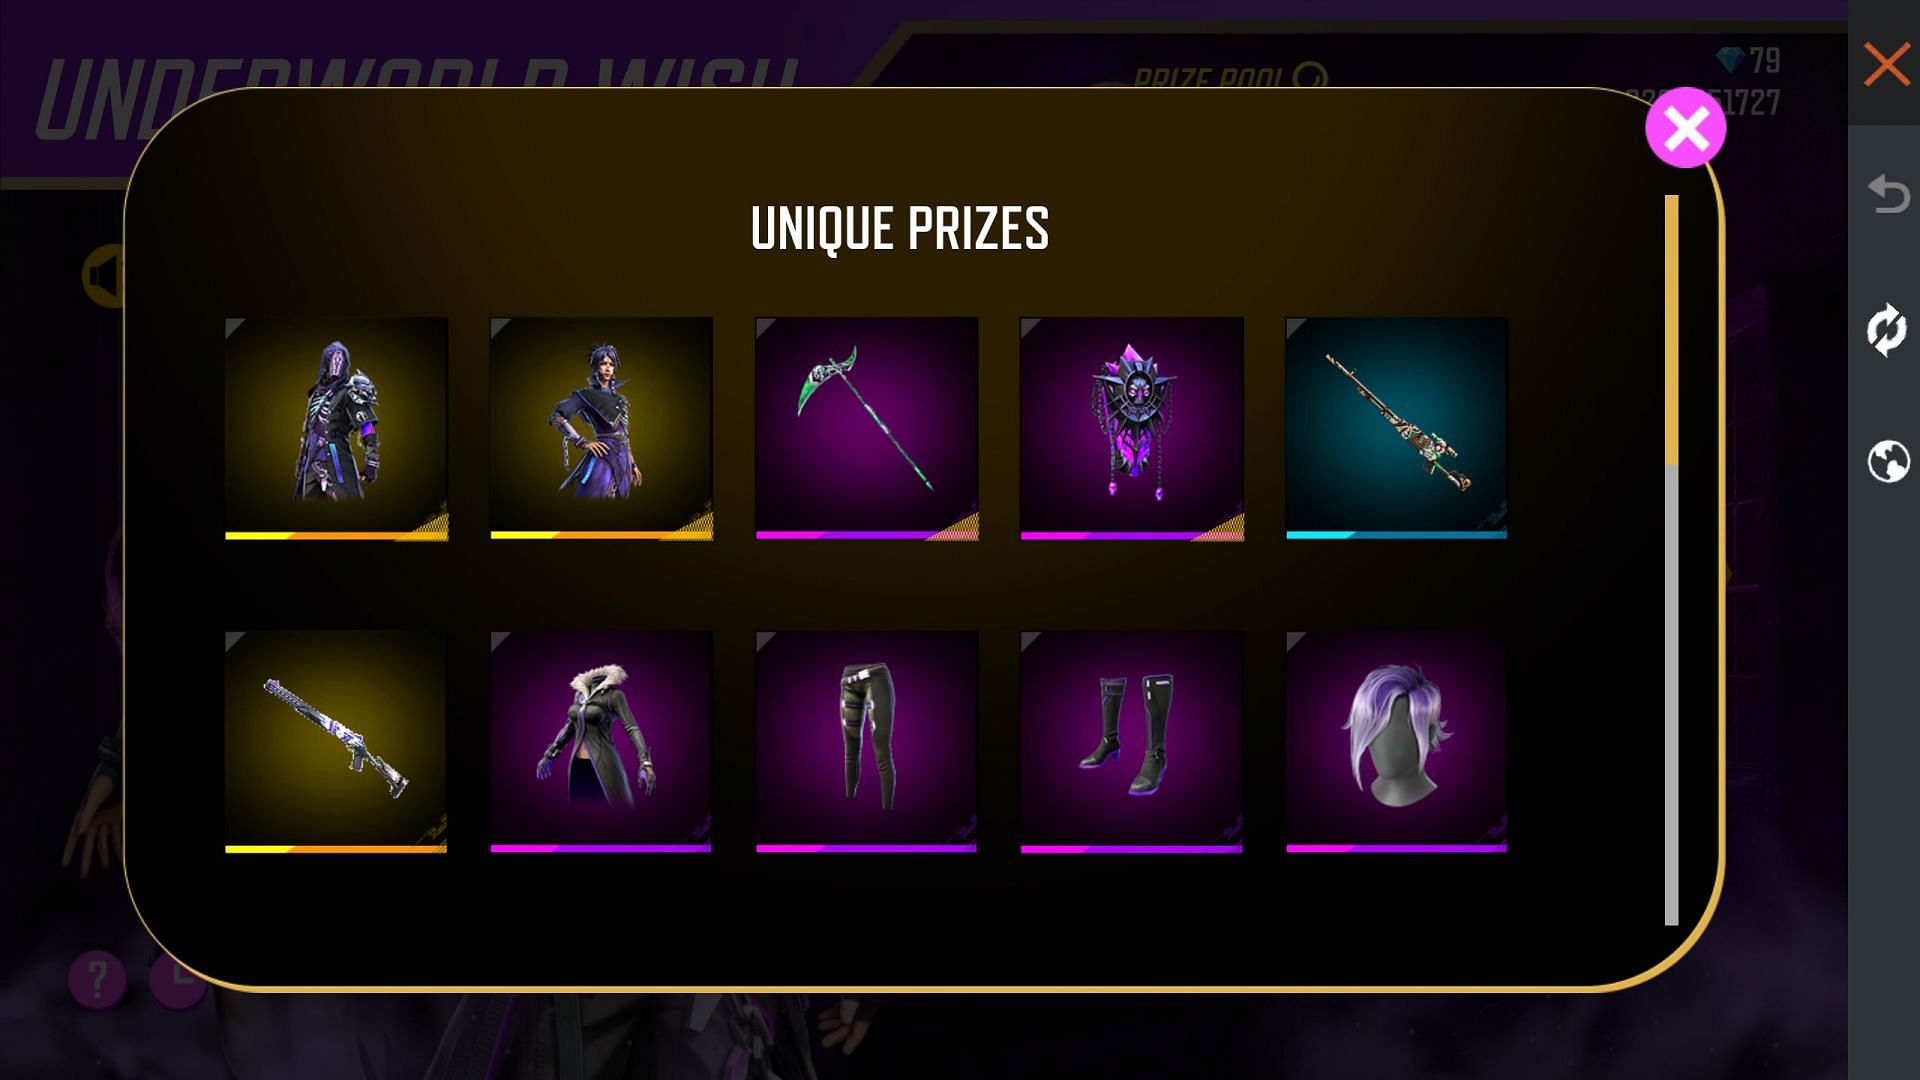 The prize pool includes lot of items (Image via Garena)